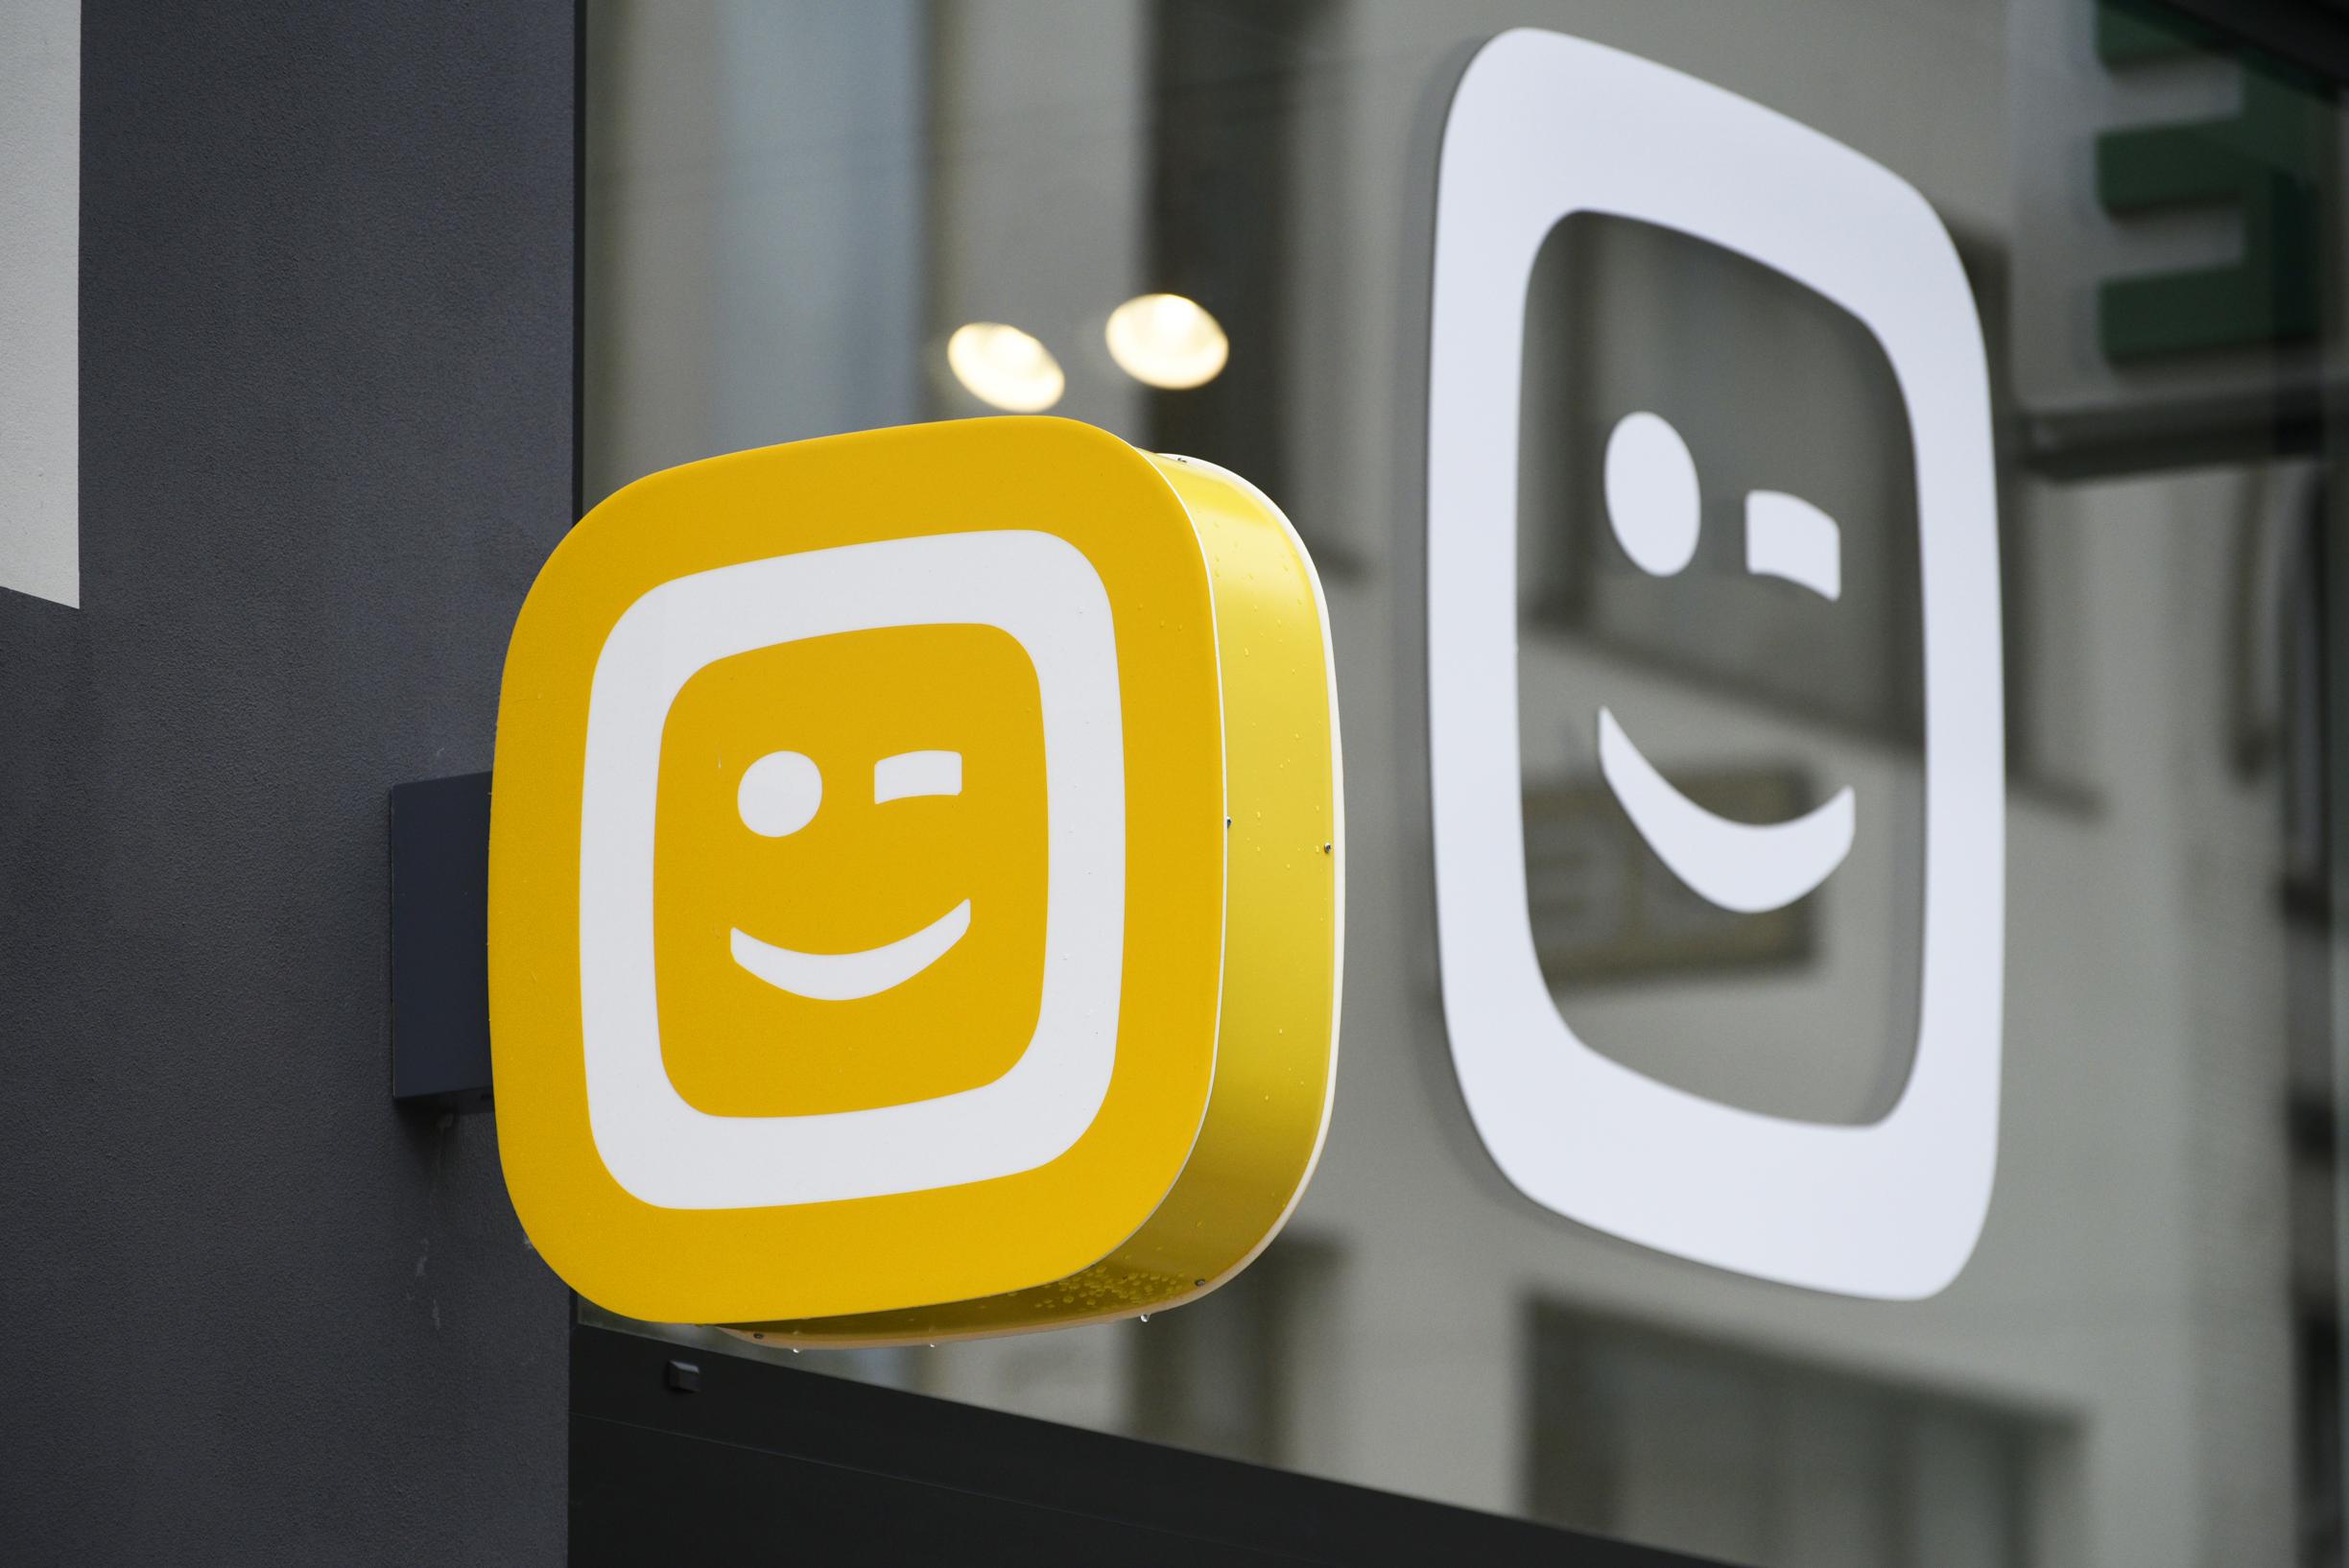 Telecommunications Ombudsman Service sees rise in complaints, Telenet vows to return to quality service.